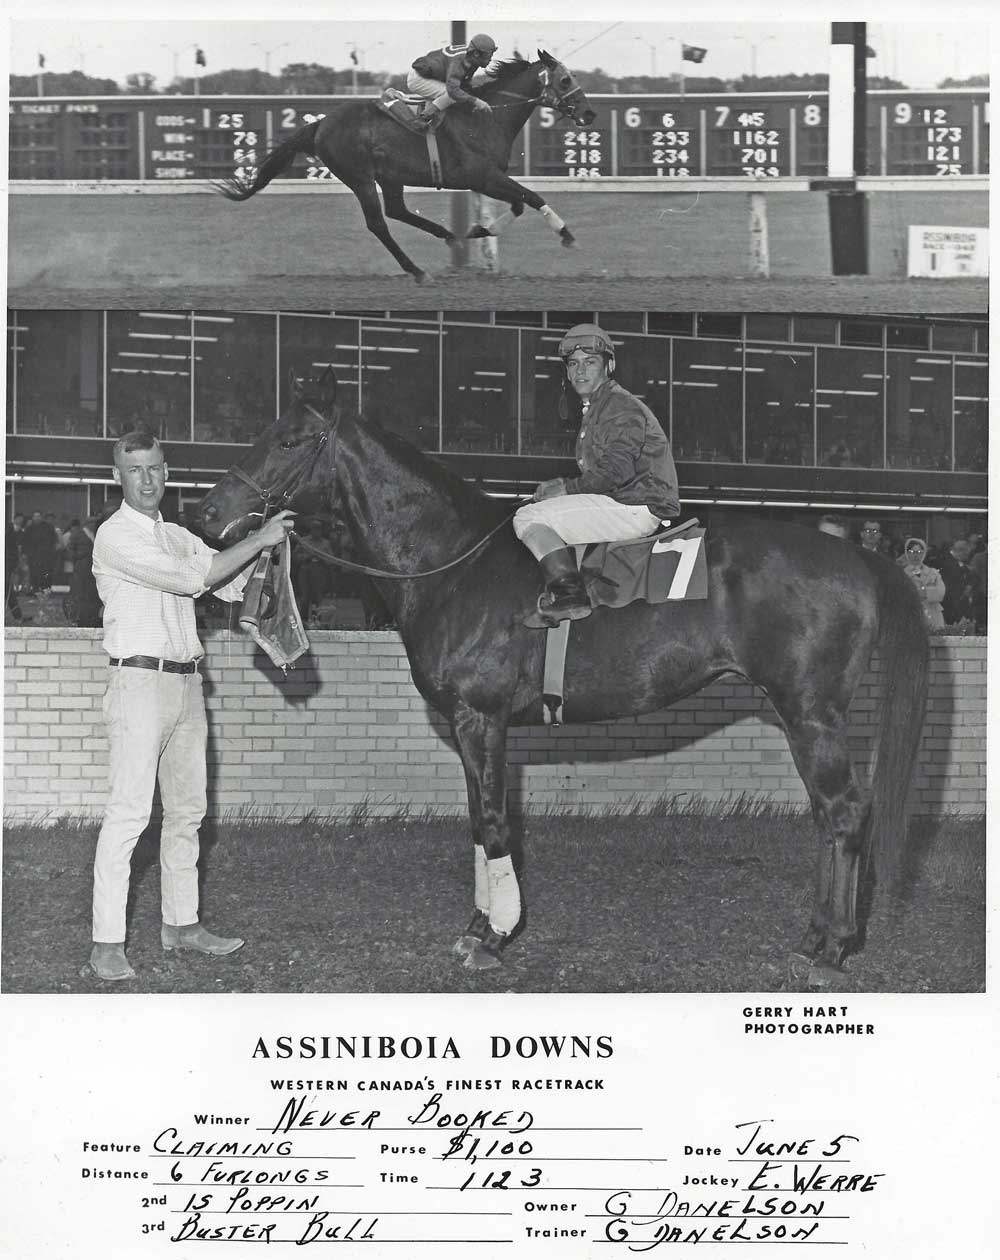 Ed Werre wins on Never Booked for trainer Gary Danelson at ASD. June 5, 1968.